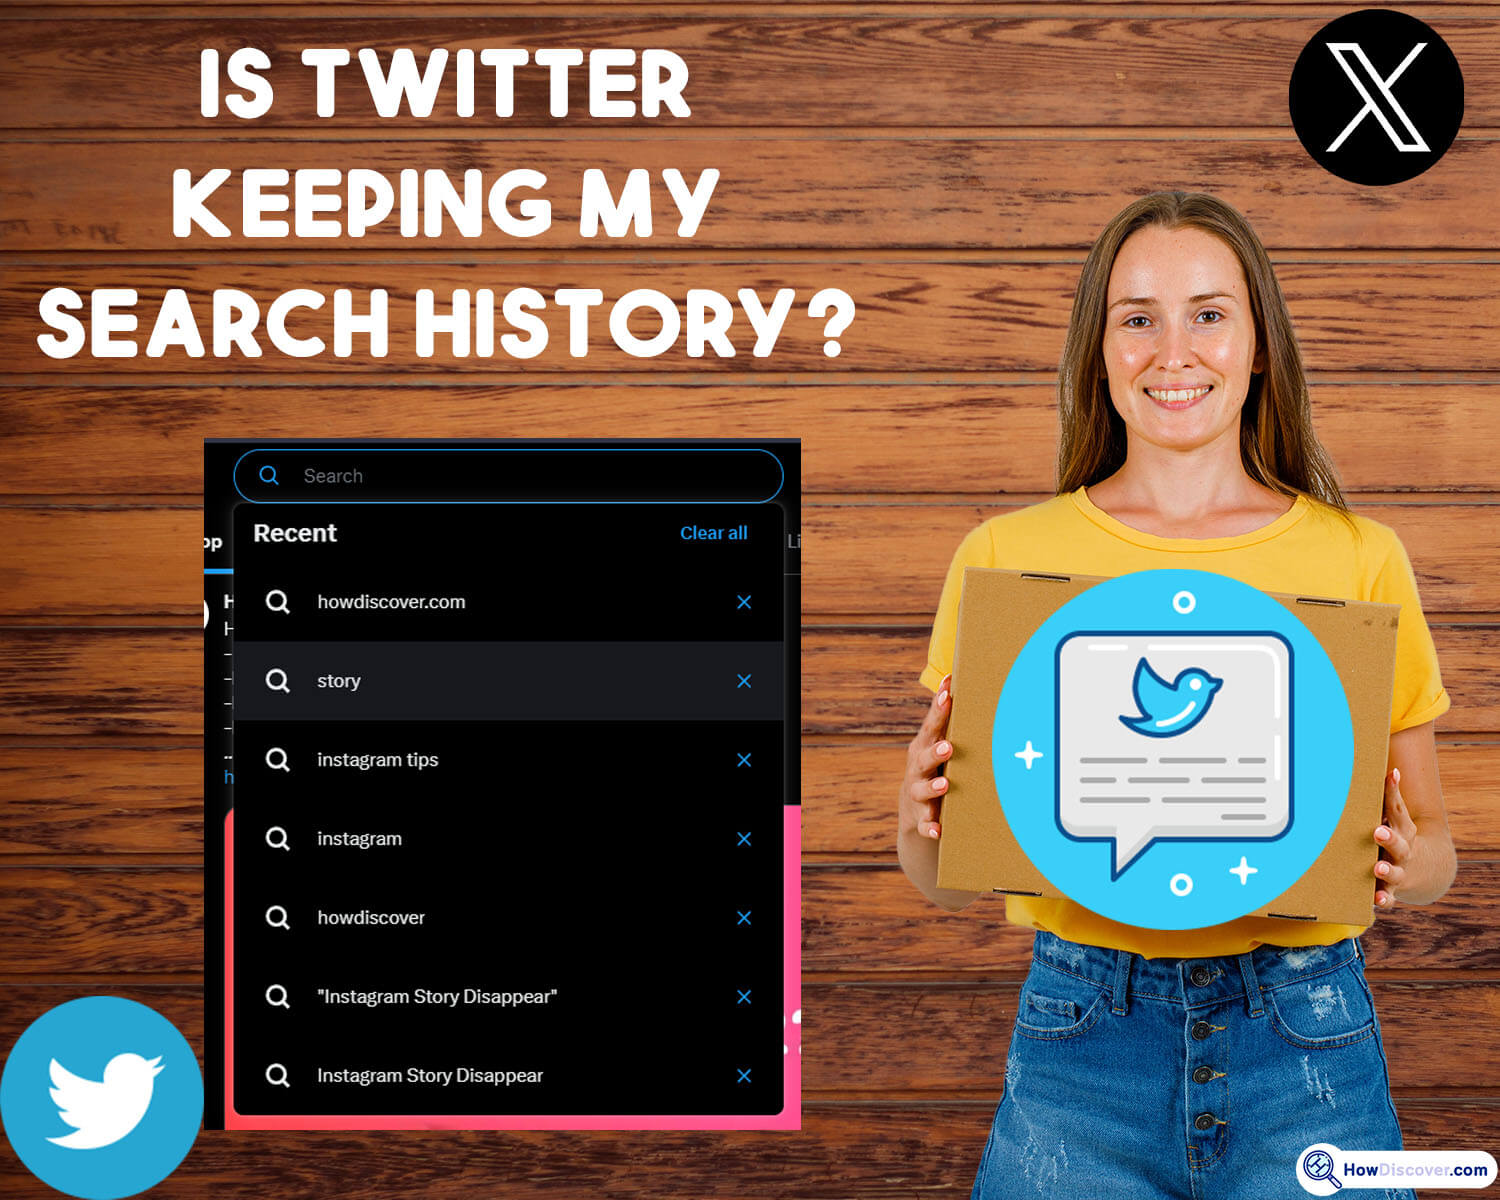 Is Twitter keeping my search history? - Can People See What You Search On Twitter